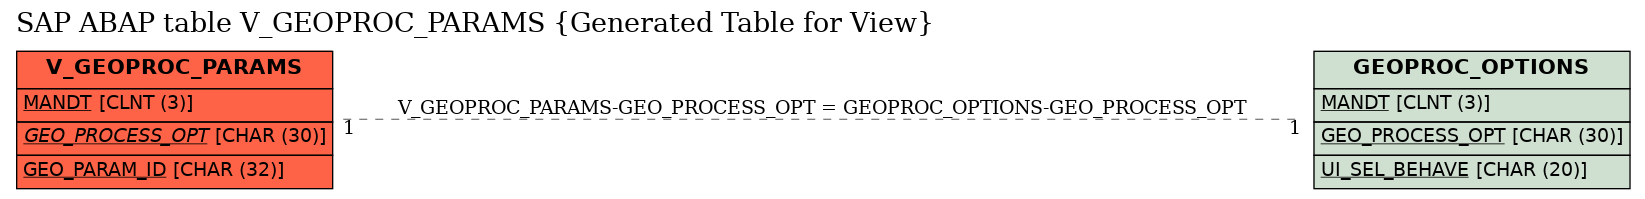 E-R Diagram for table V_GEOPROC_PARAMS (Generated Table for View)